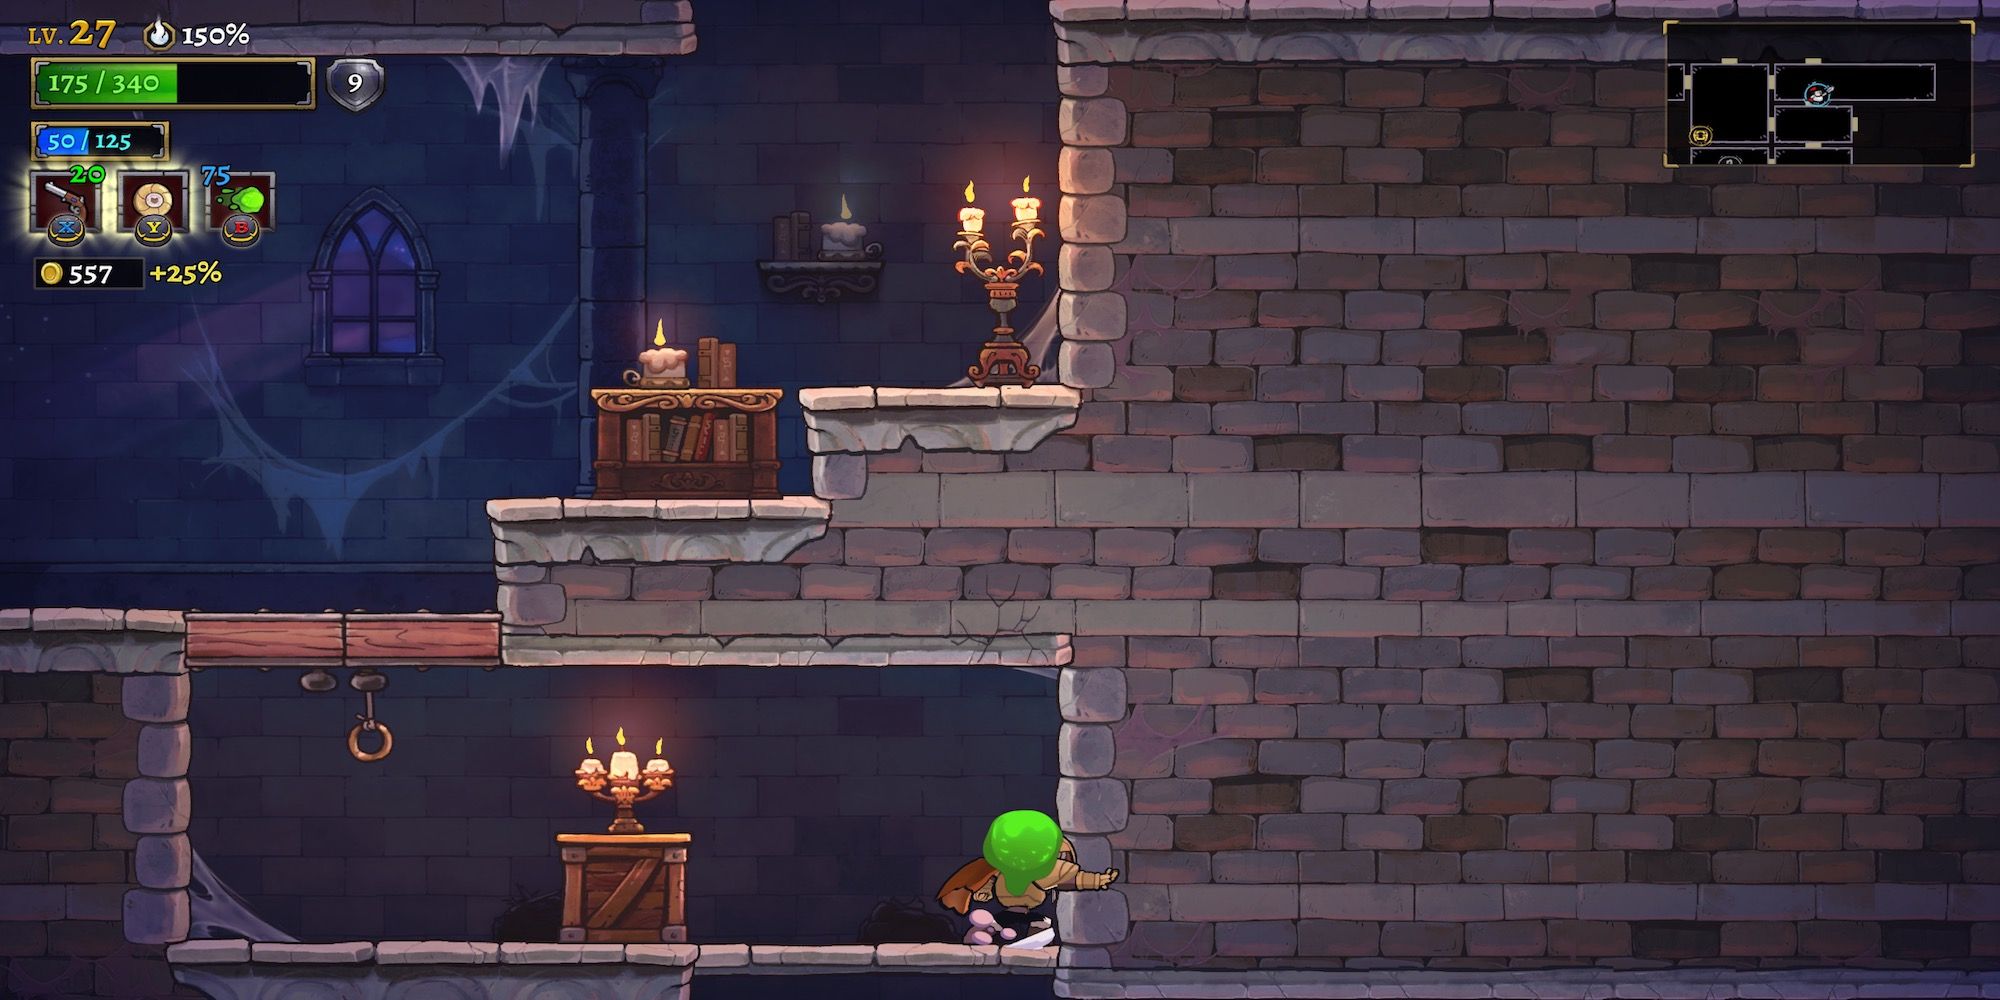 Exploring the world in Rogue Legacy 2